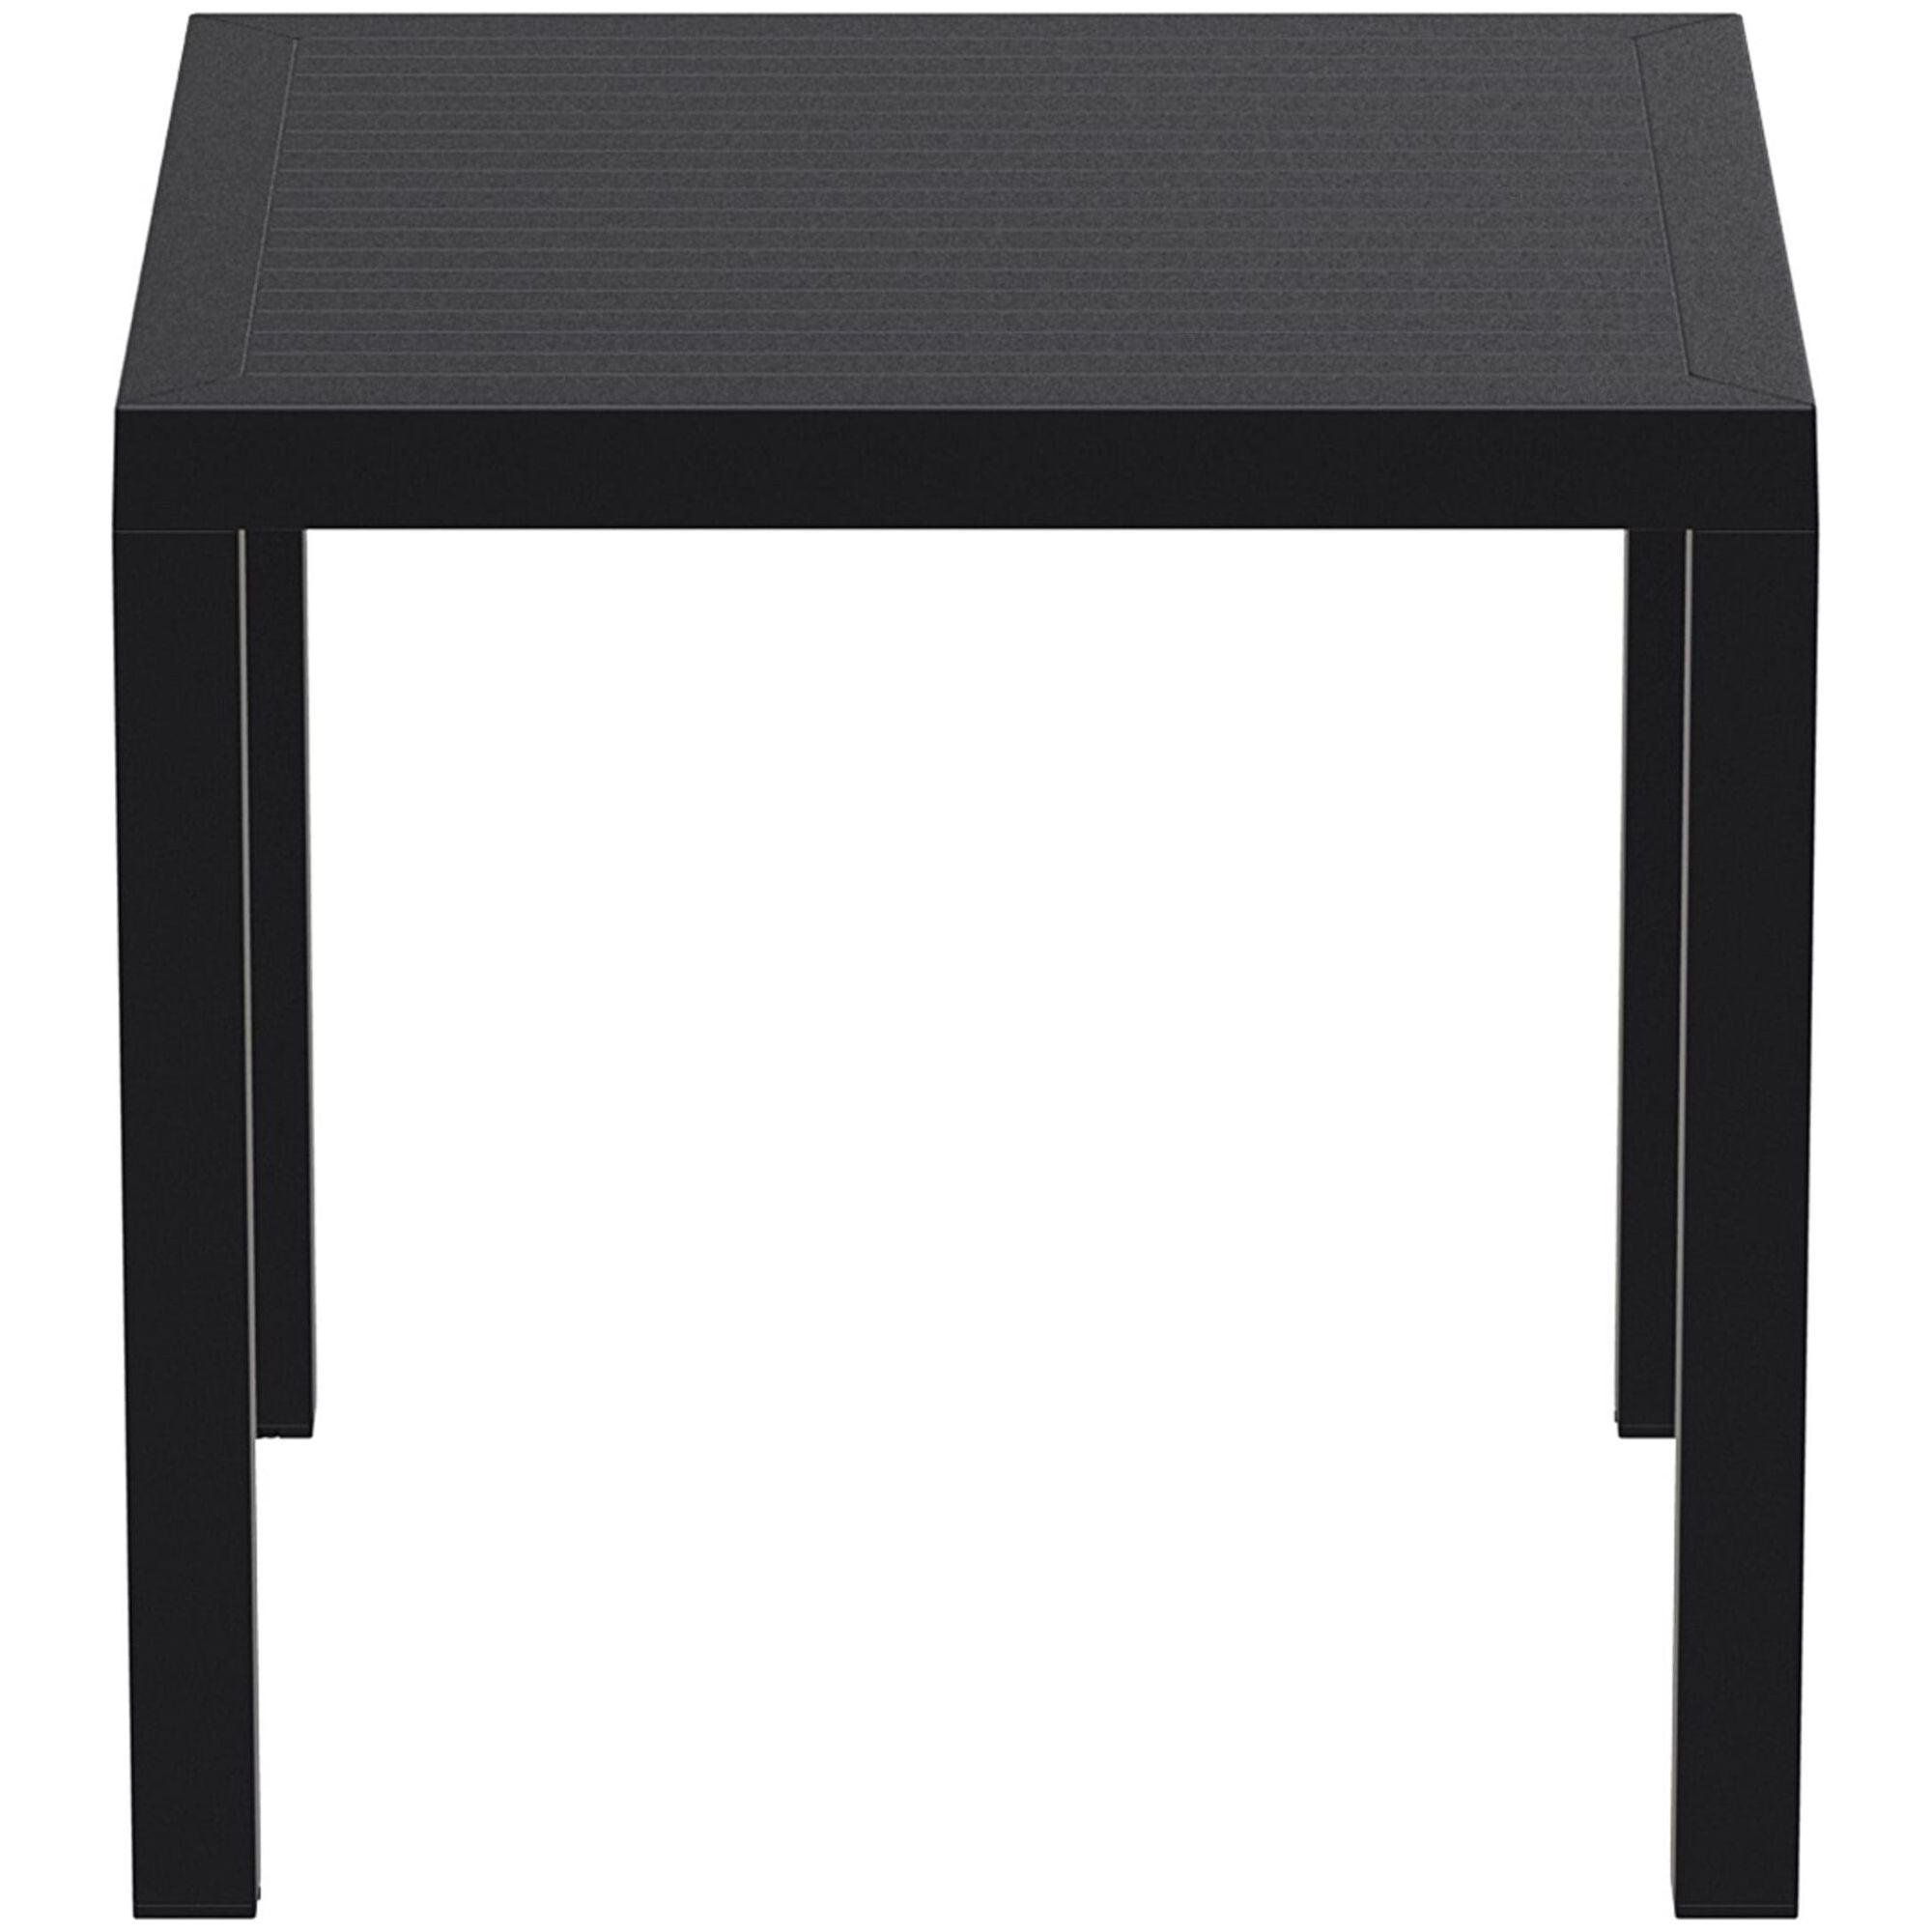 Garbar Arctic Square table indoors, outdoors 80x80 black